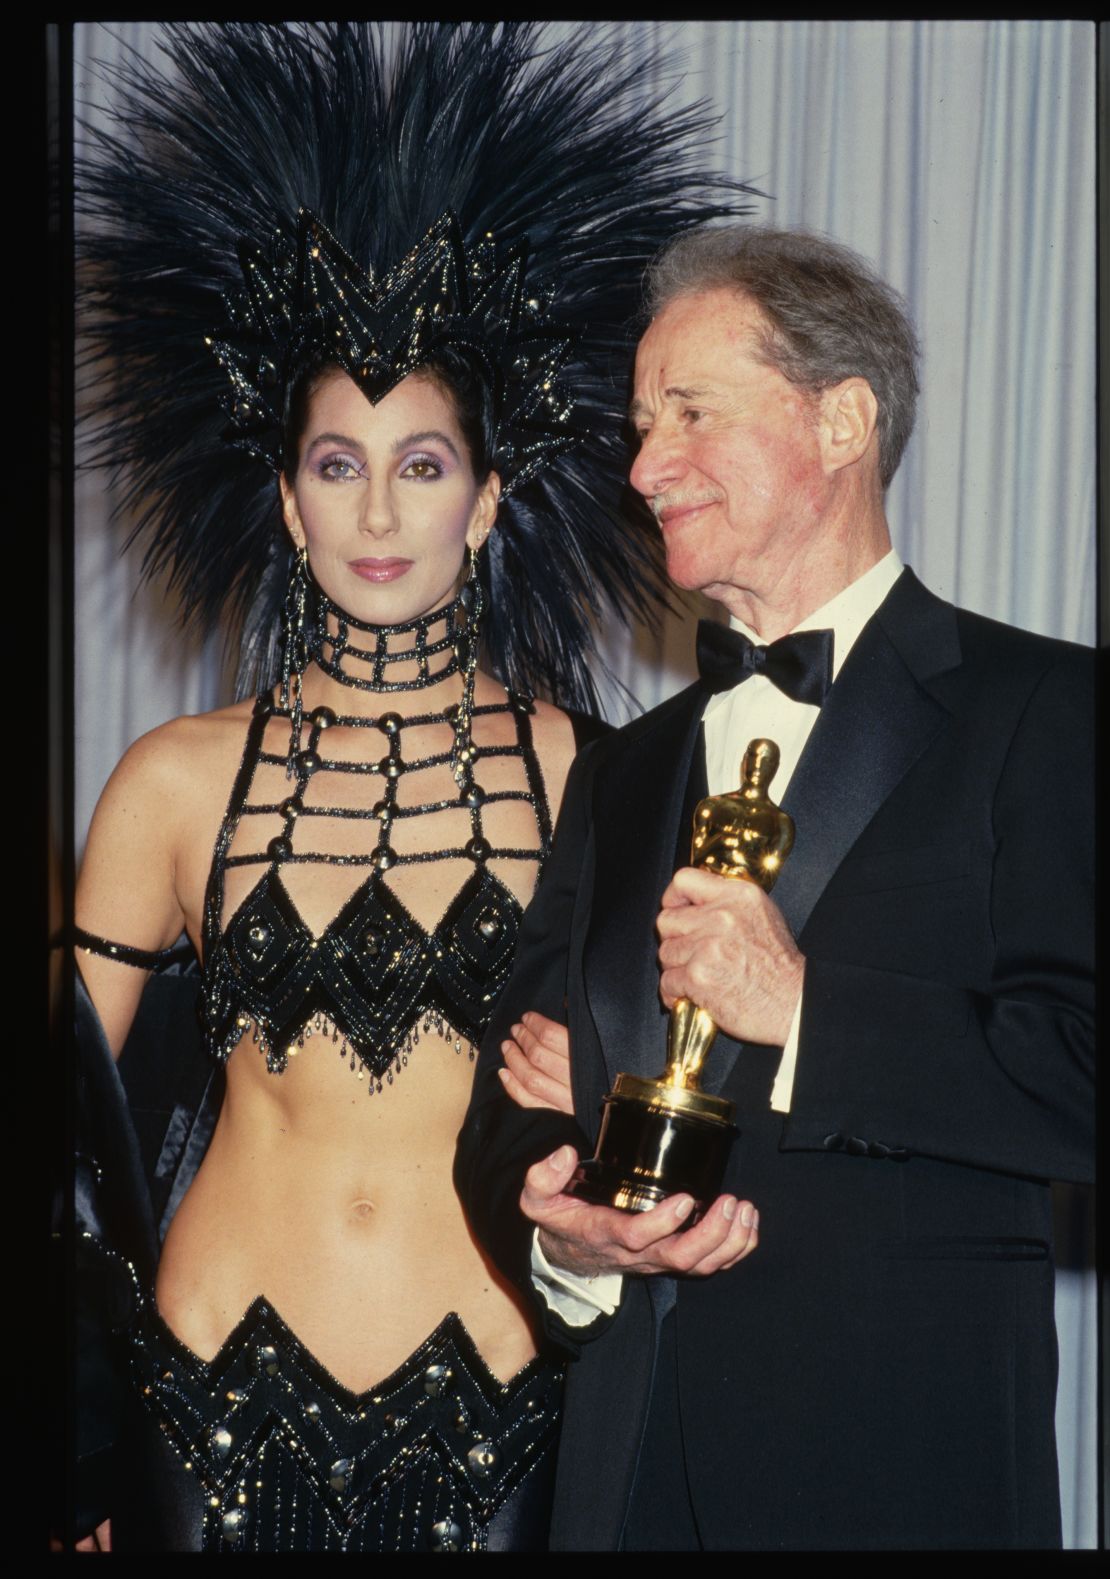 Cher and Don Ameche at the 1986 Oscar Awards.